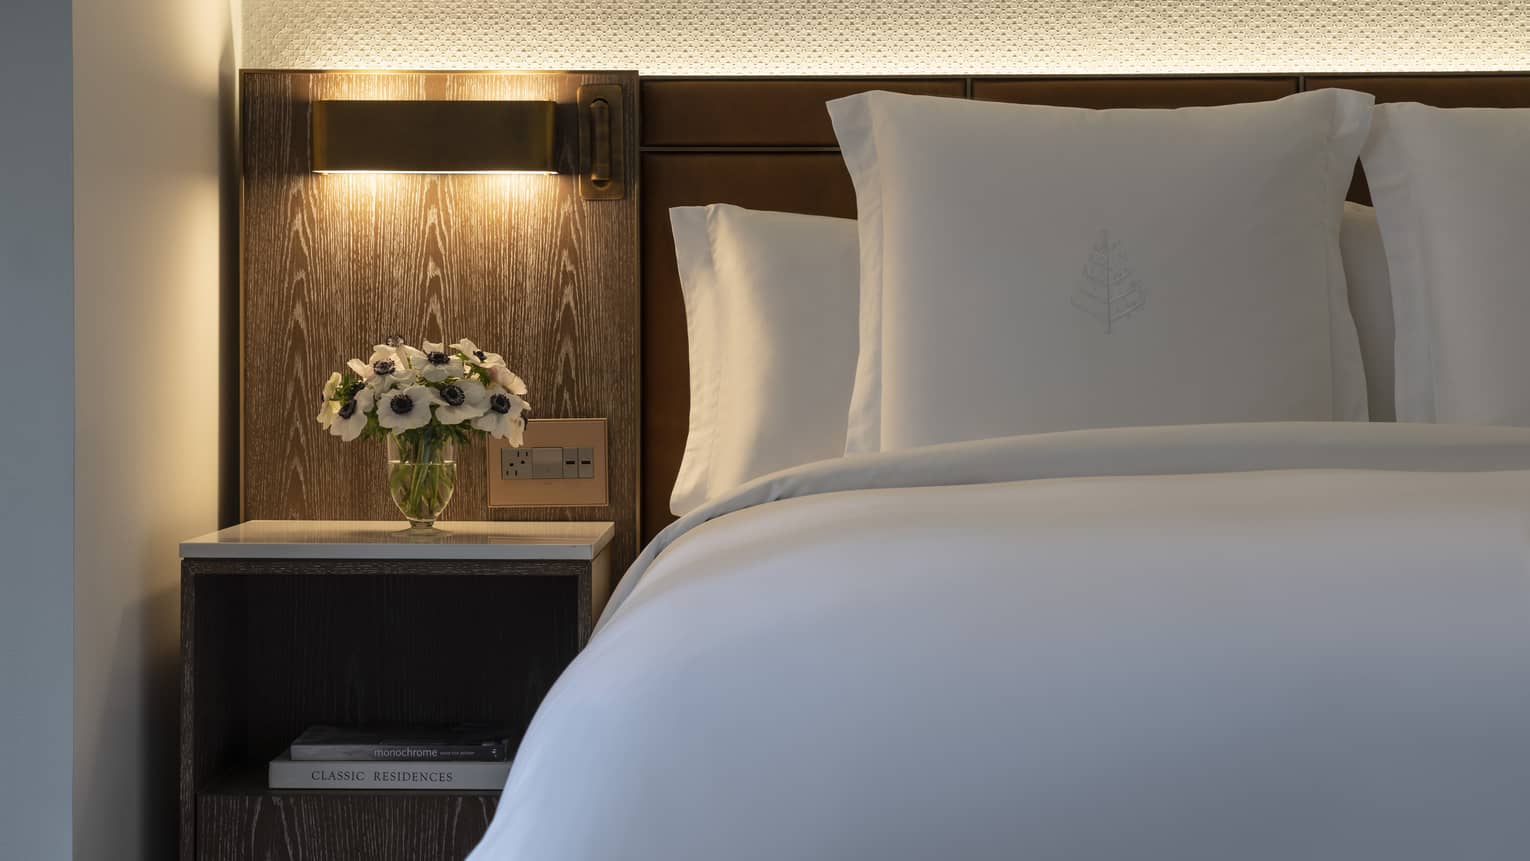 Close-up of bed with white linens and pillows, light above bedside table with vase of flowers